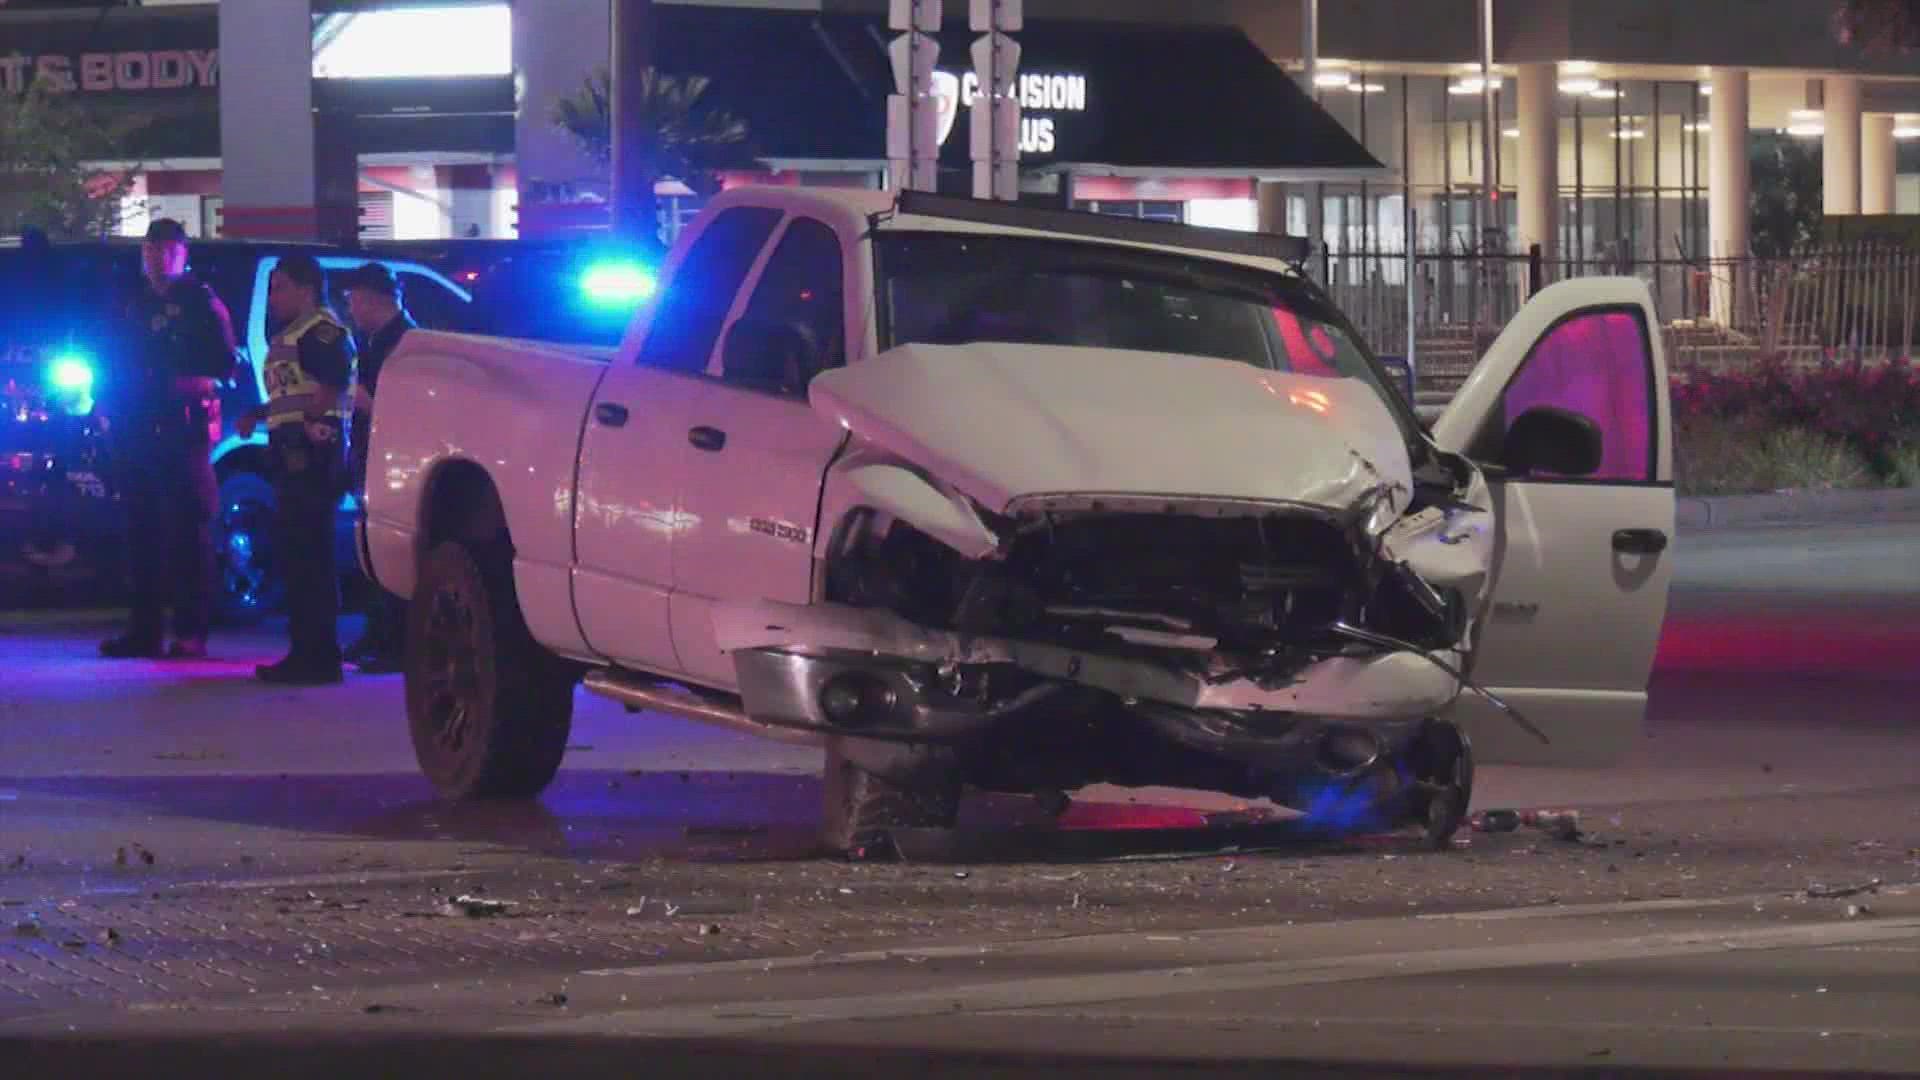 A man died in a two-vehicle crash in the Sharpstown area early Thursday morning, according to Houston police.